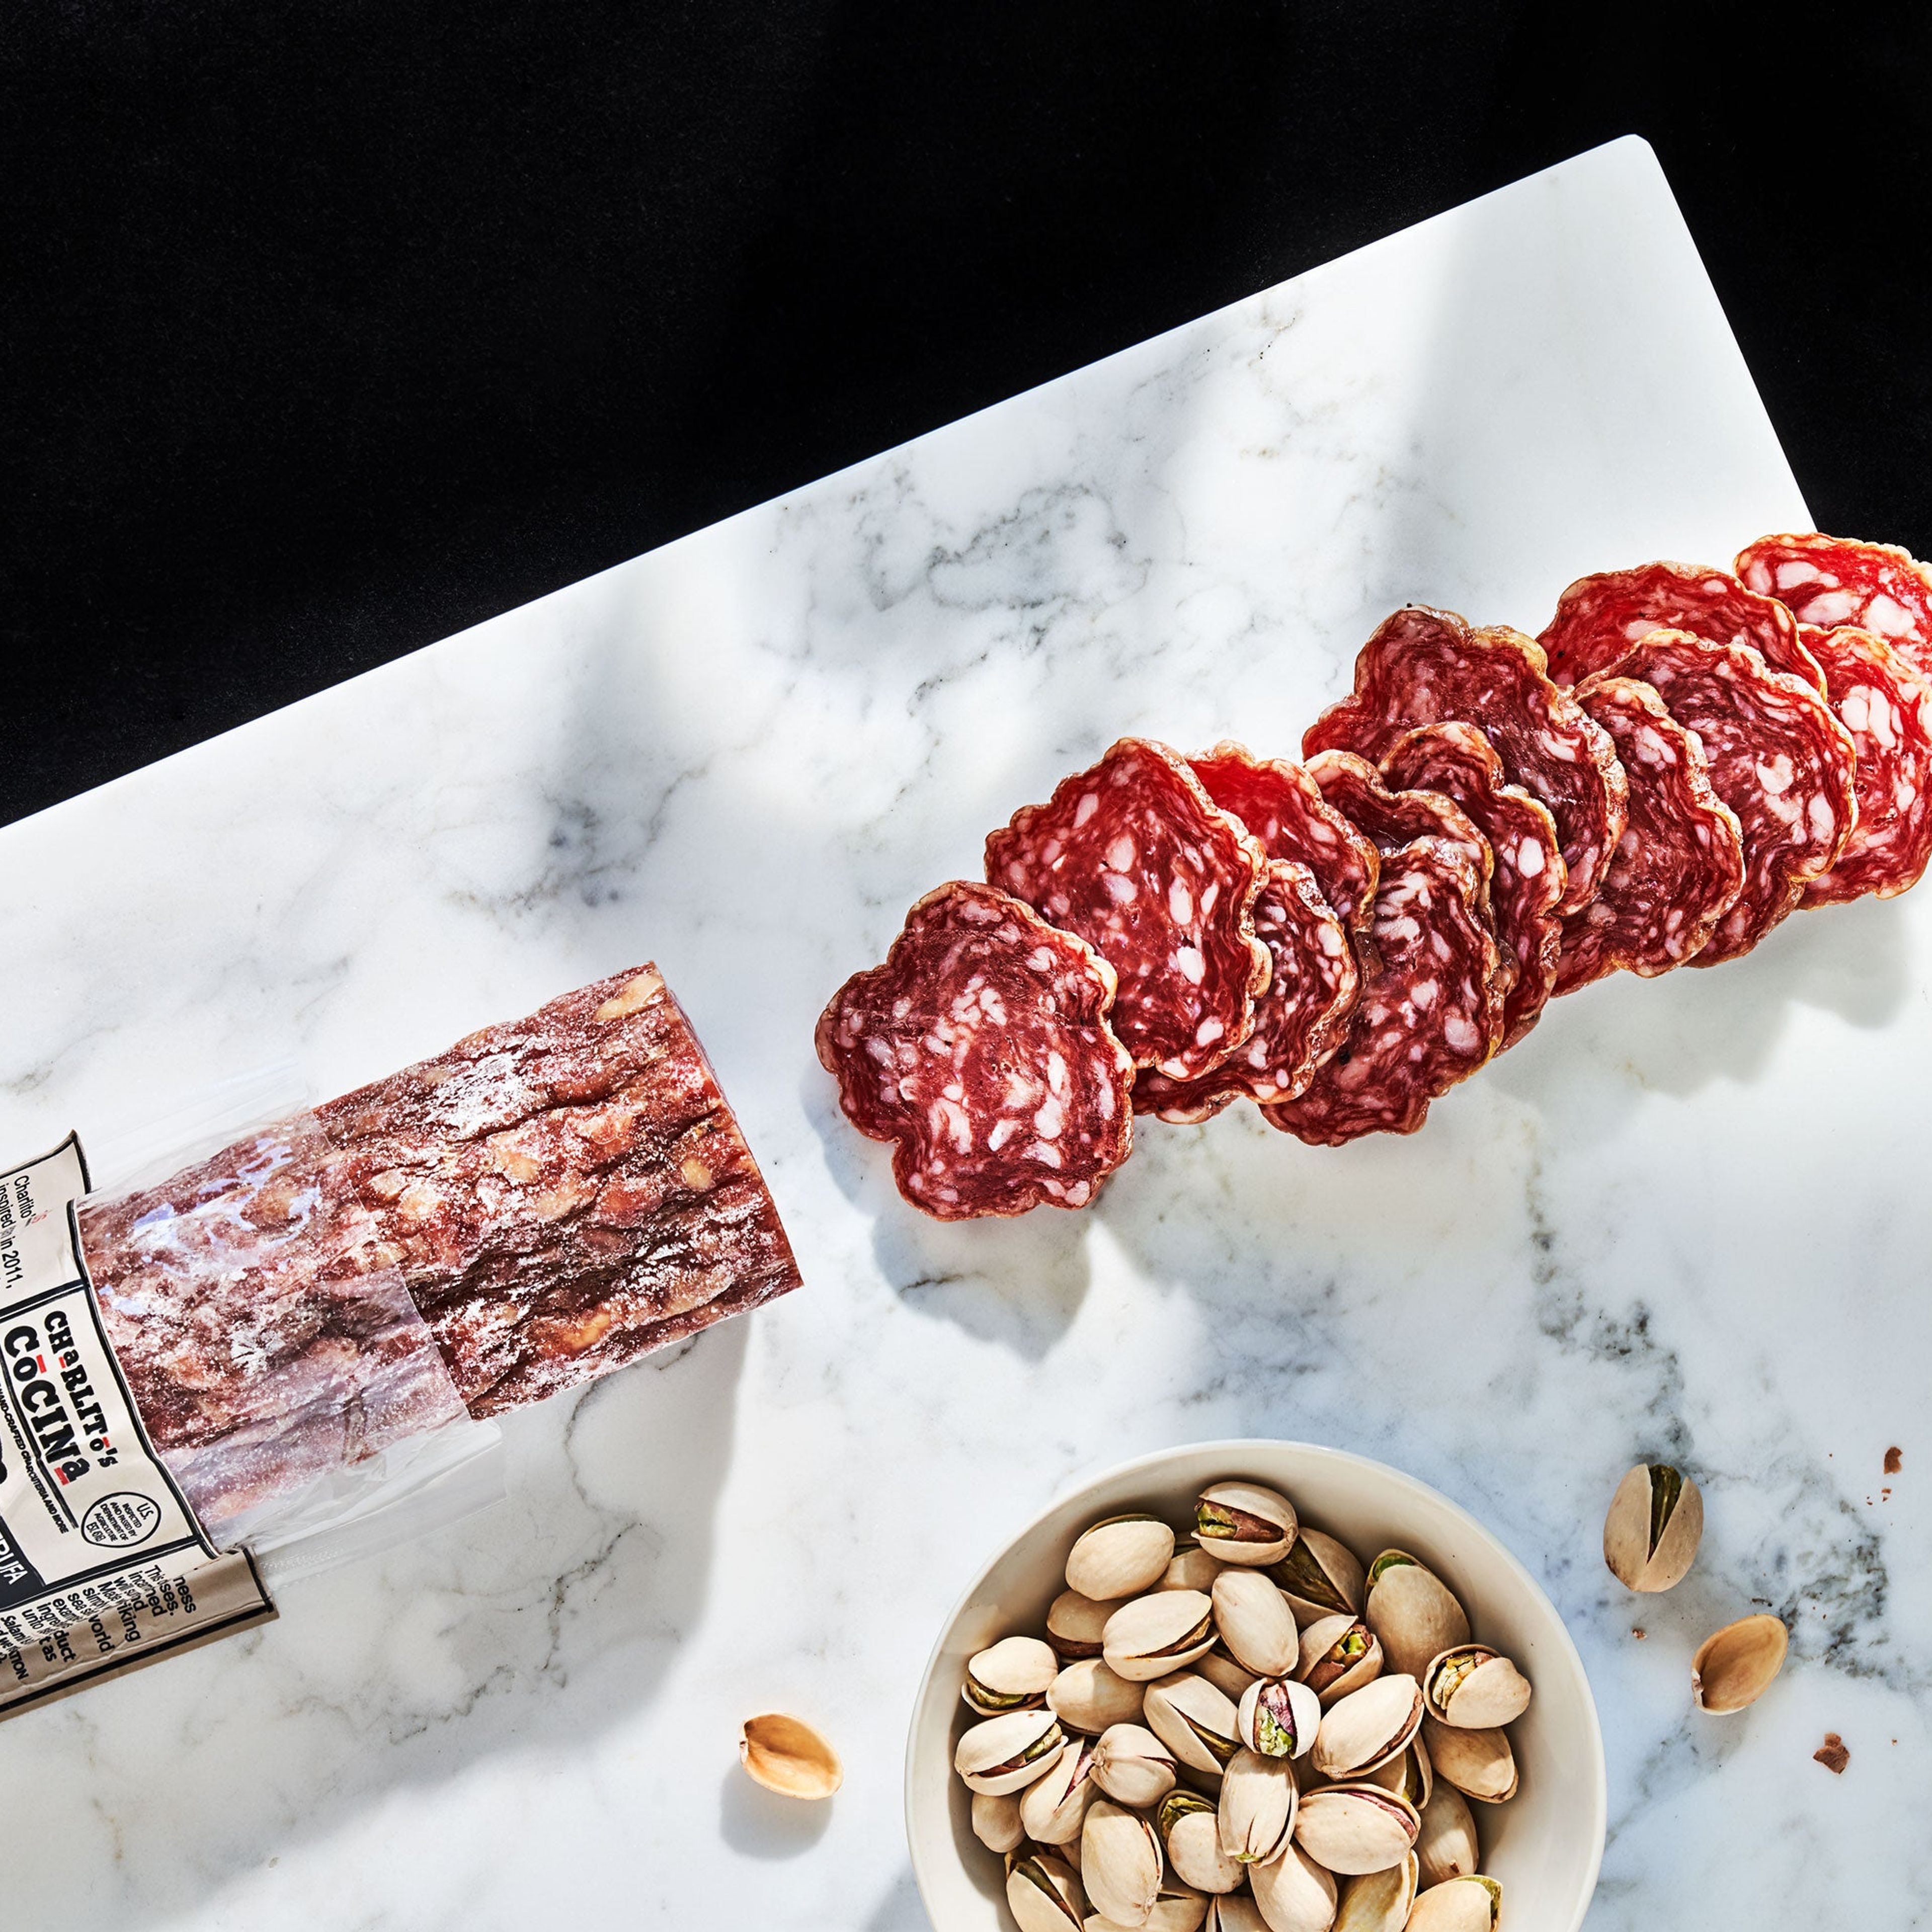 Create Your Own Charcuterie Set - Choose at least 2 items